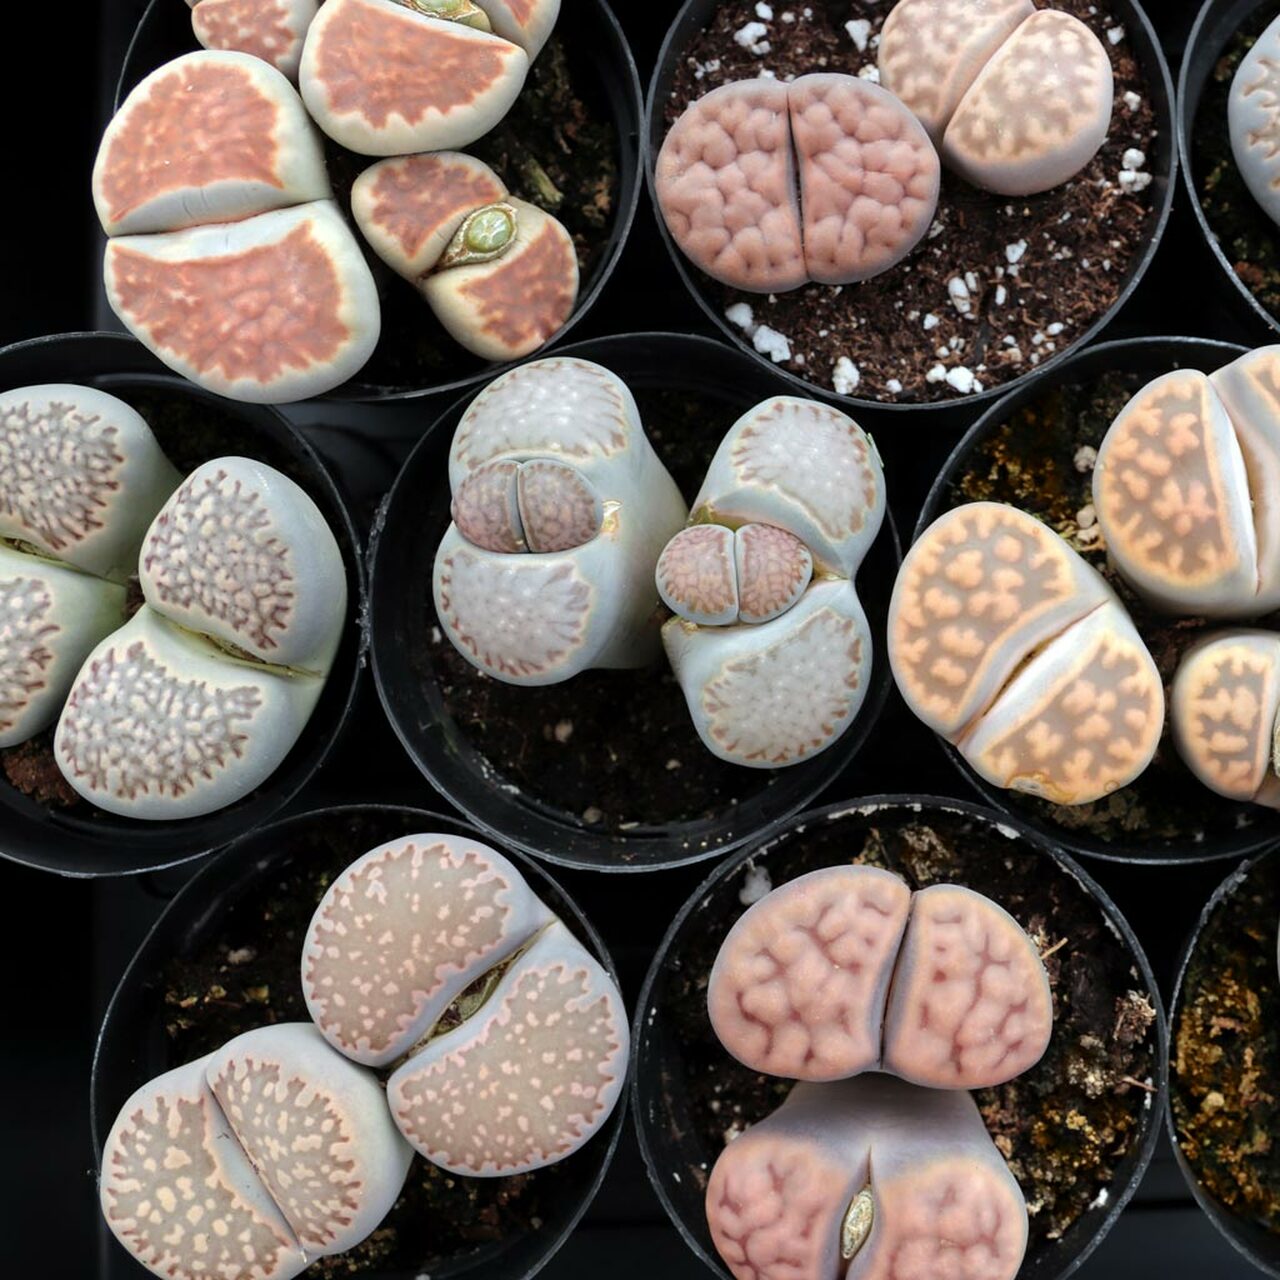 Lithops - South African Plants That Look Like Stones